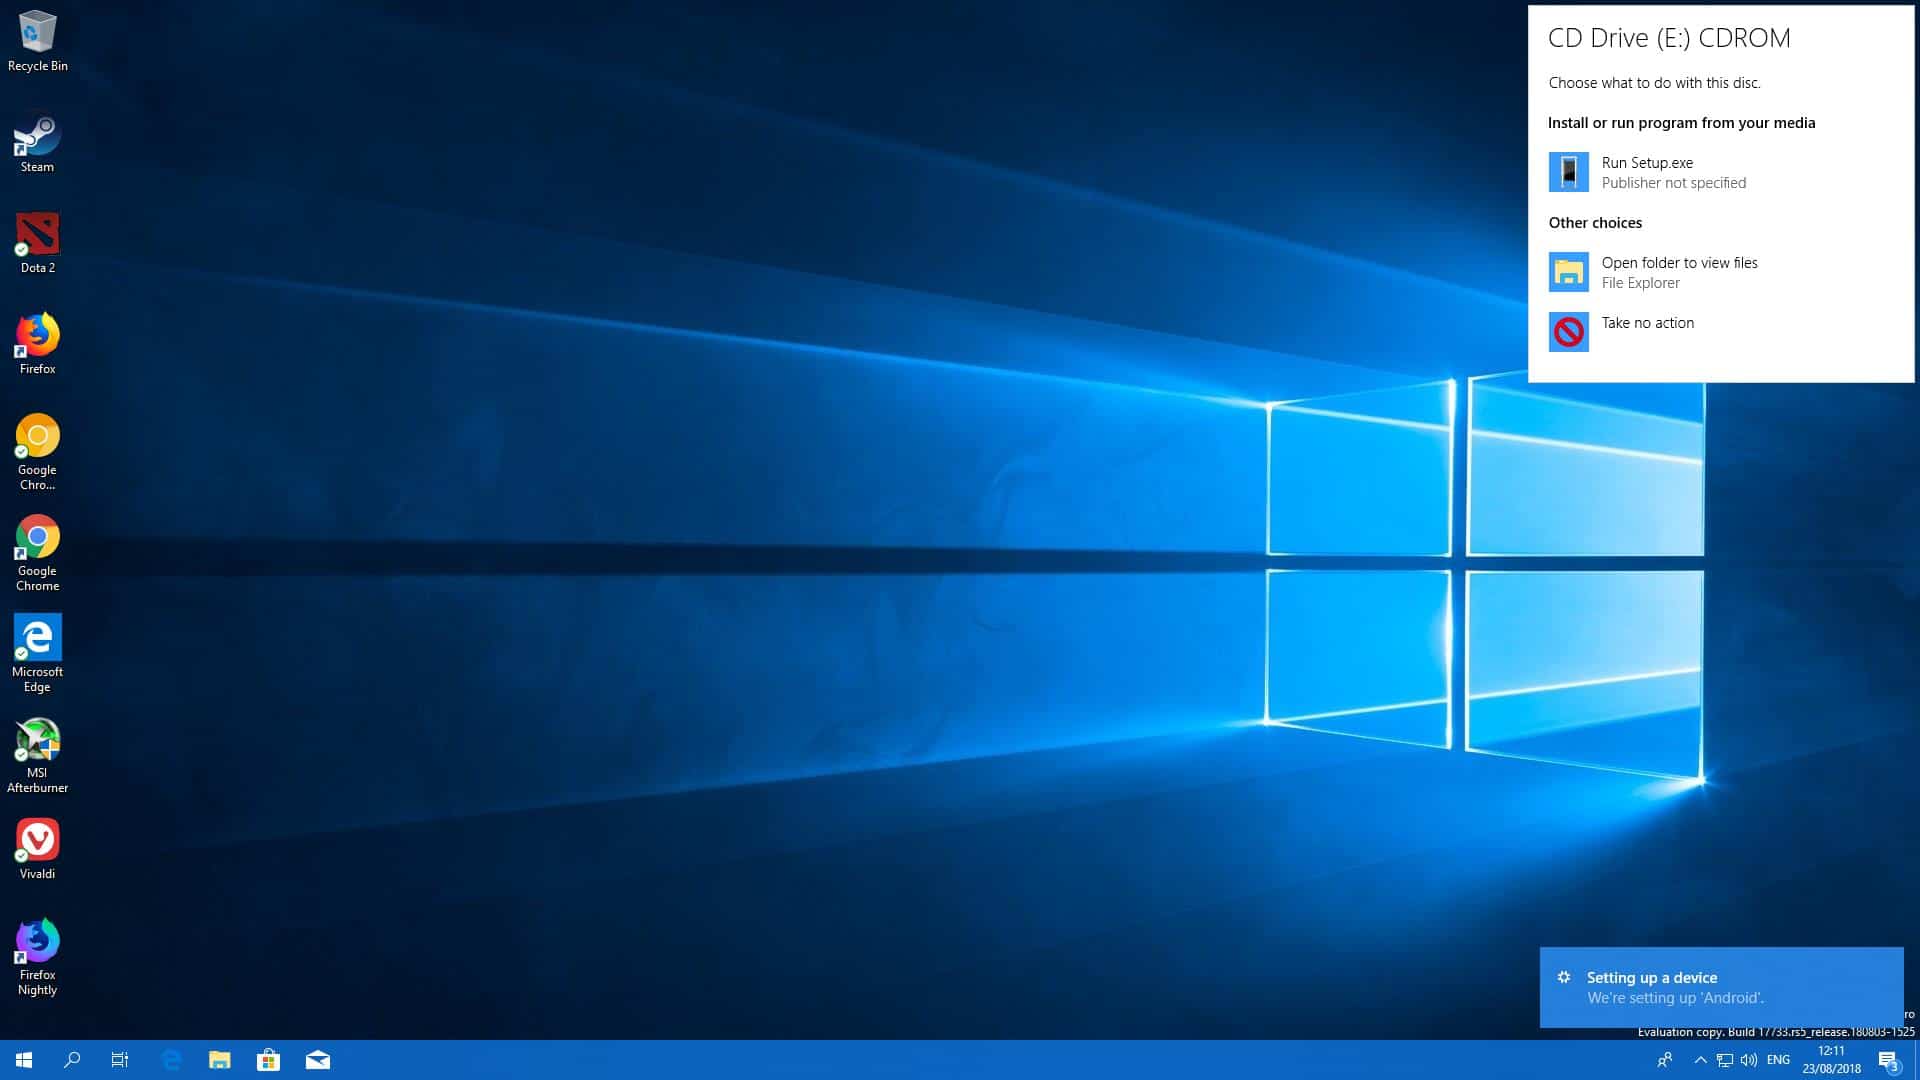 Upcoming Windows 10 update to fix memory leaks, slow copy operations, and app crashes